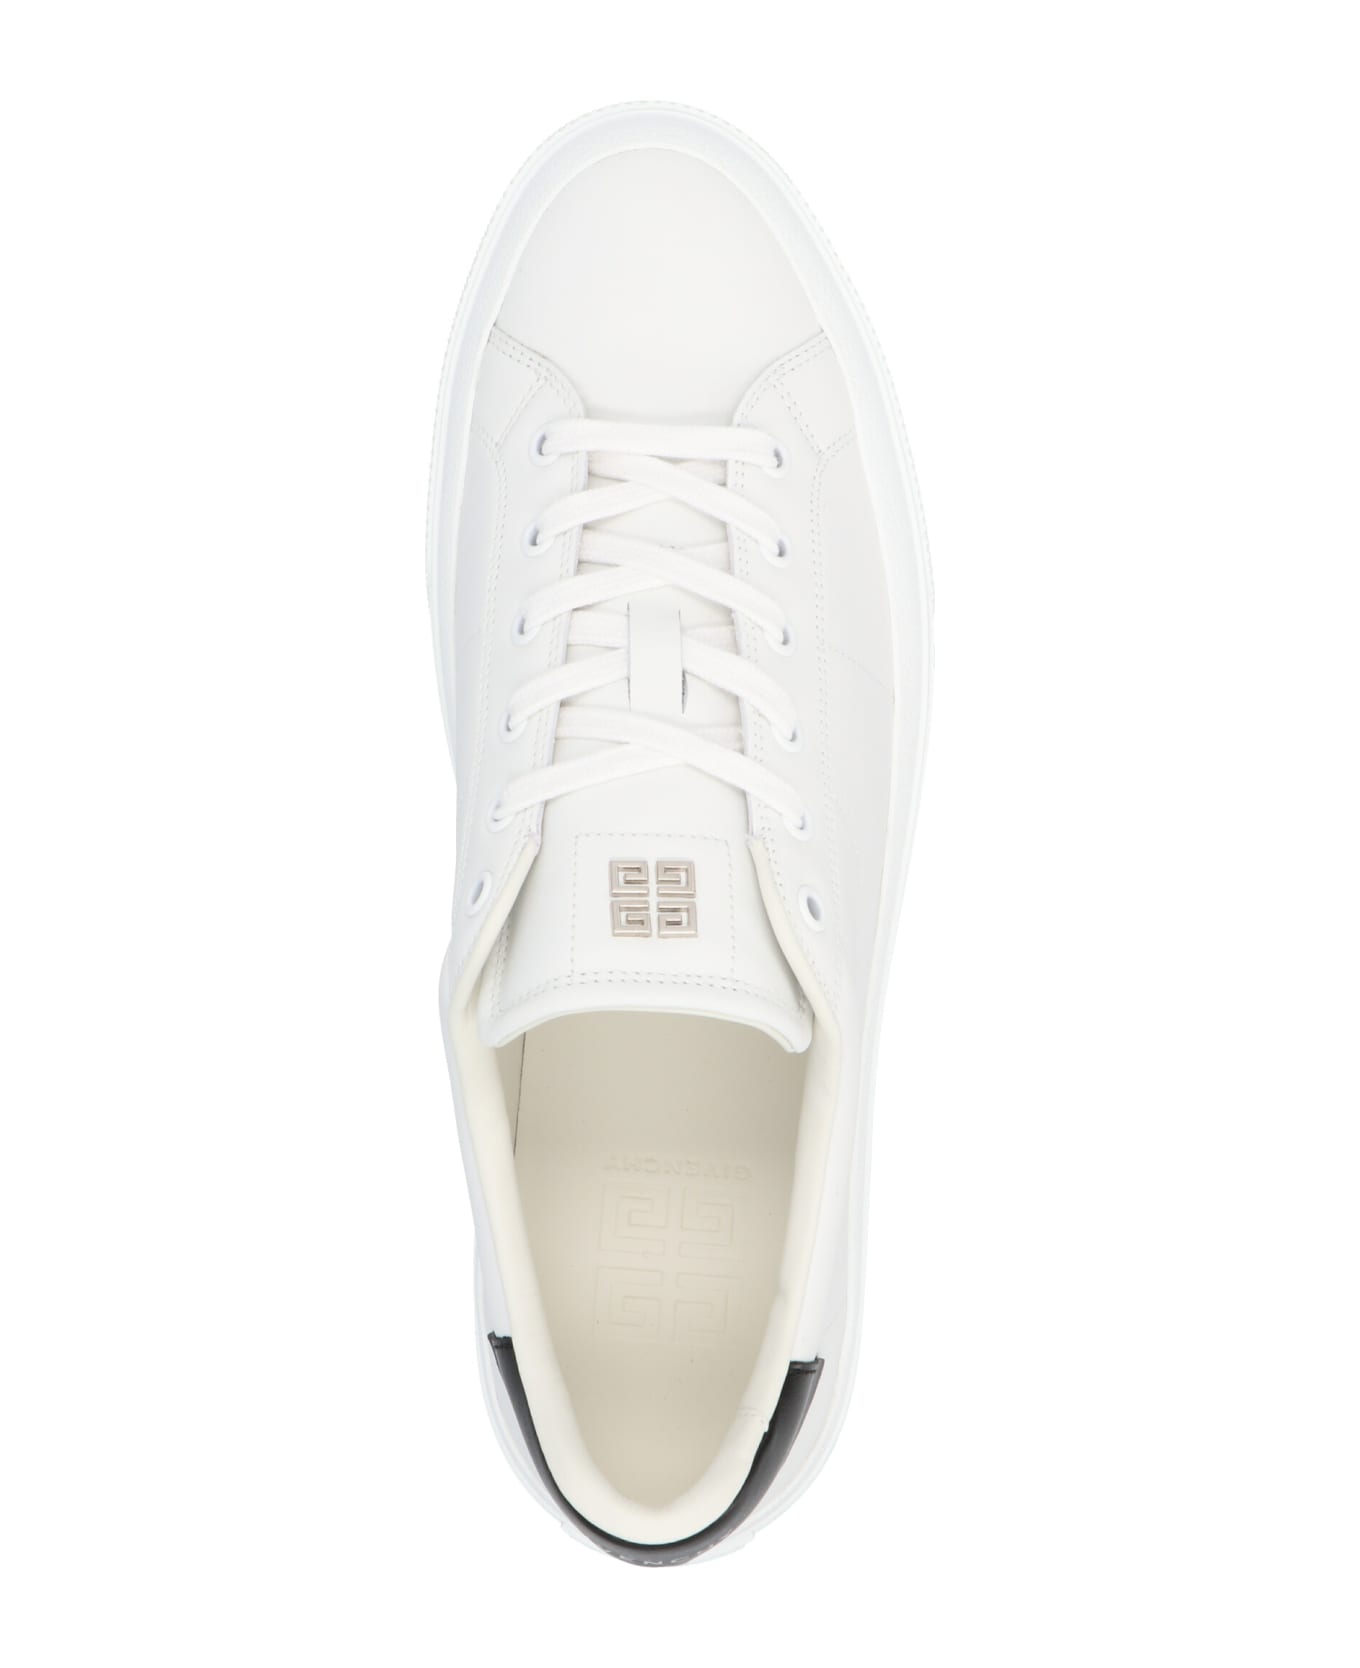 Givenchy City Sport Sneakers - White スニーカー